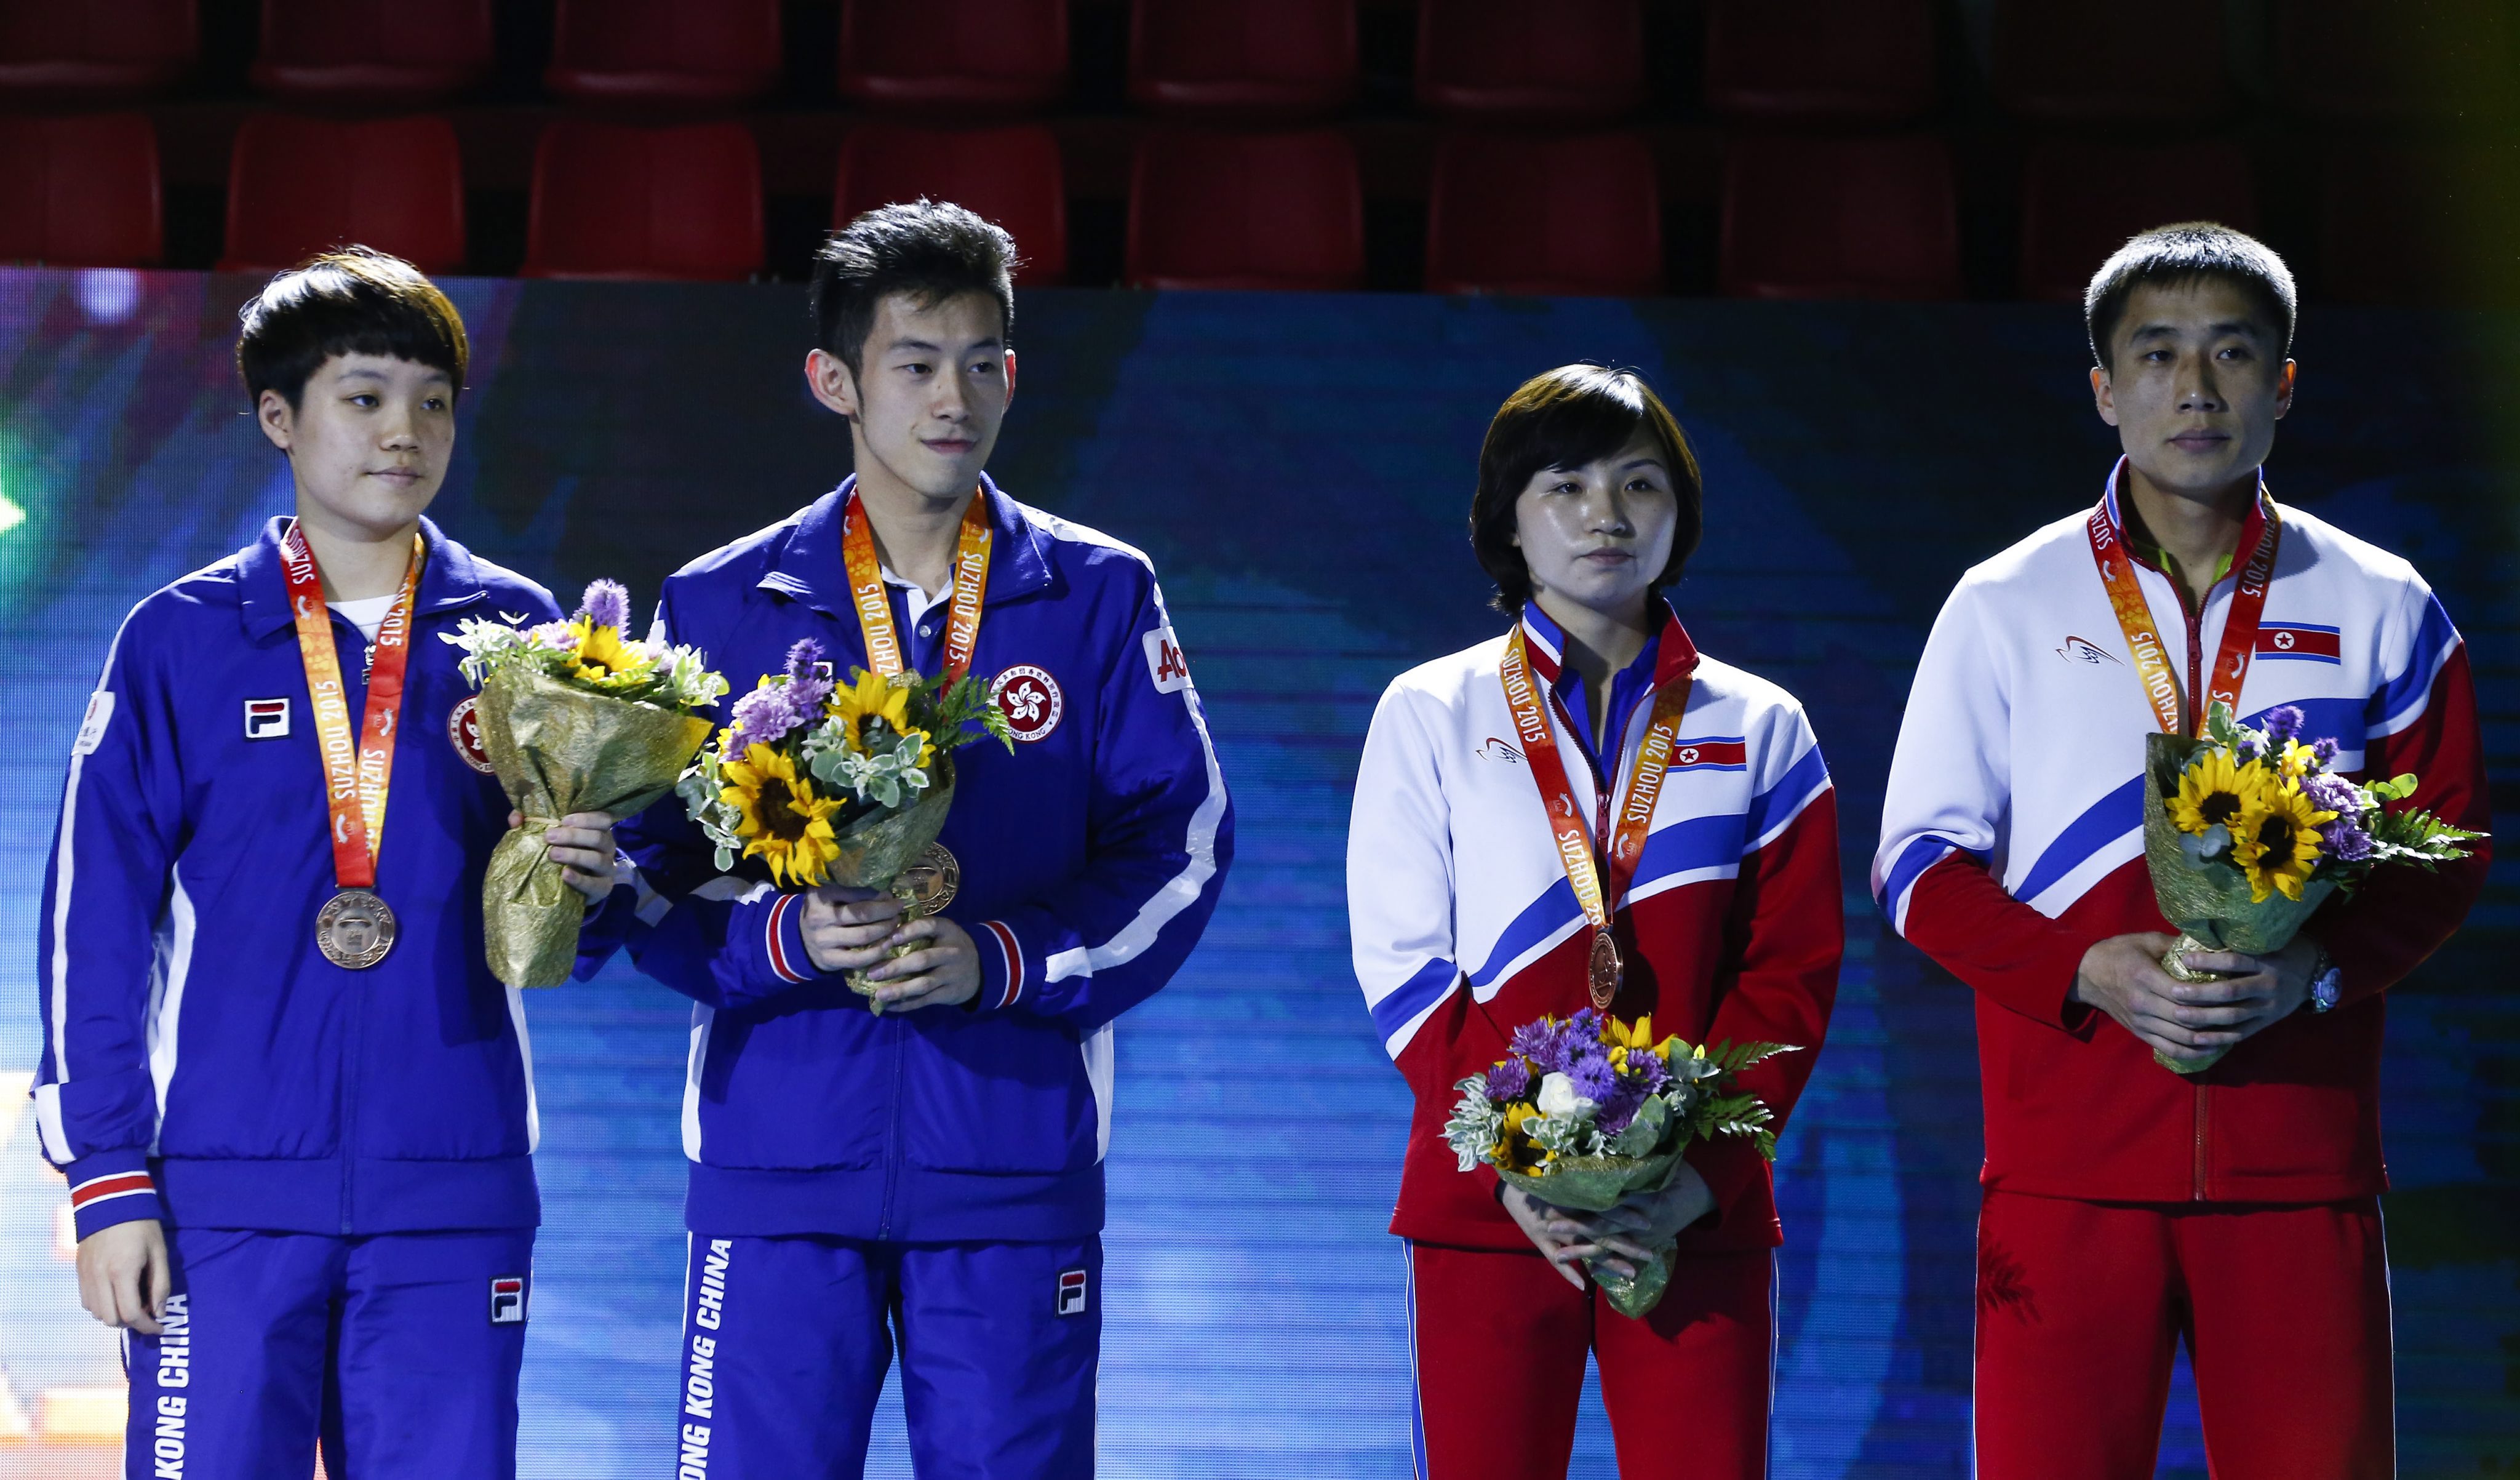 Doo Hoi-kem  (left) and Wong Chun-ting of Hong Kong, along with Koreans Kim Jong and Kim Hyok-bong, receive their mixed doubles bronze medals at the World Table Tennis Championships in Suzhou. Photo: EPA